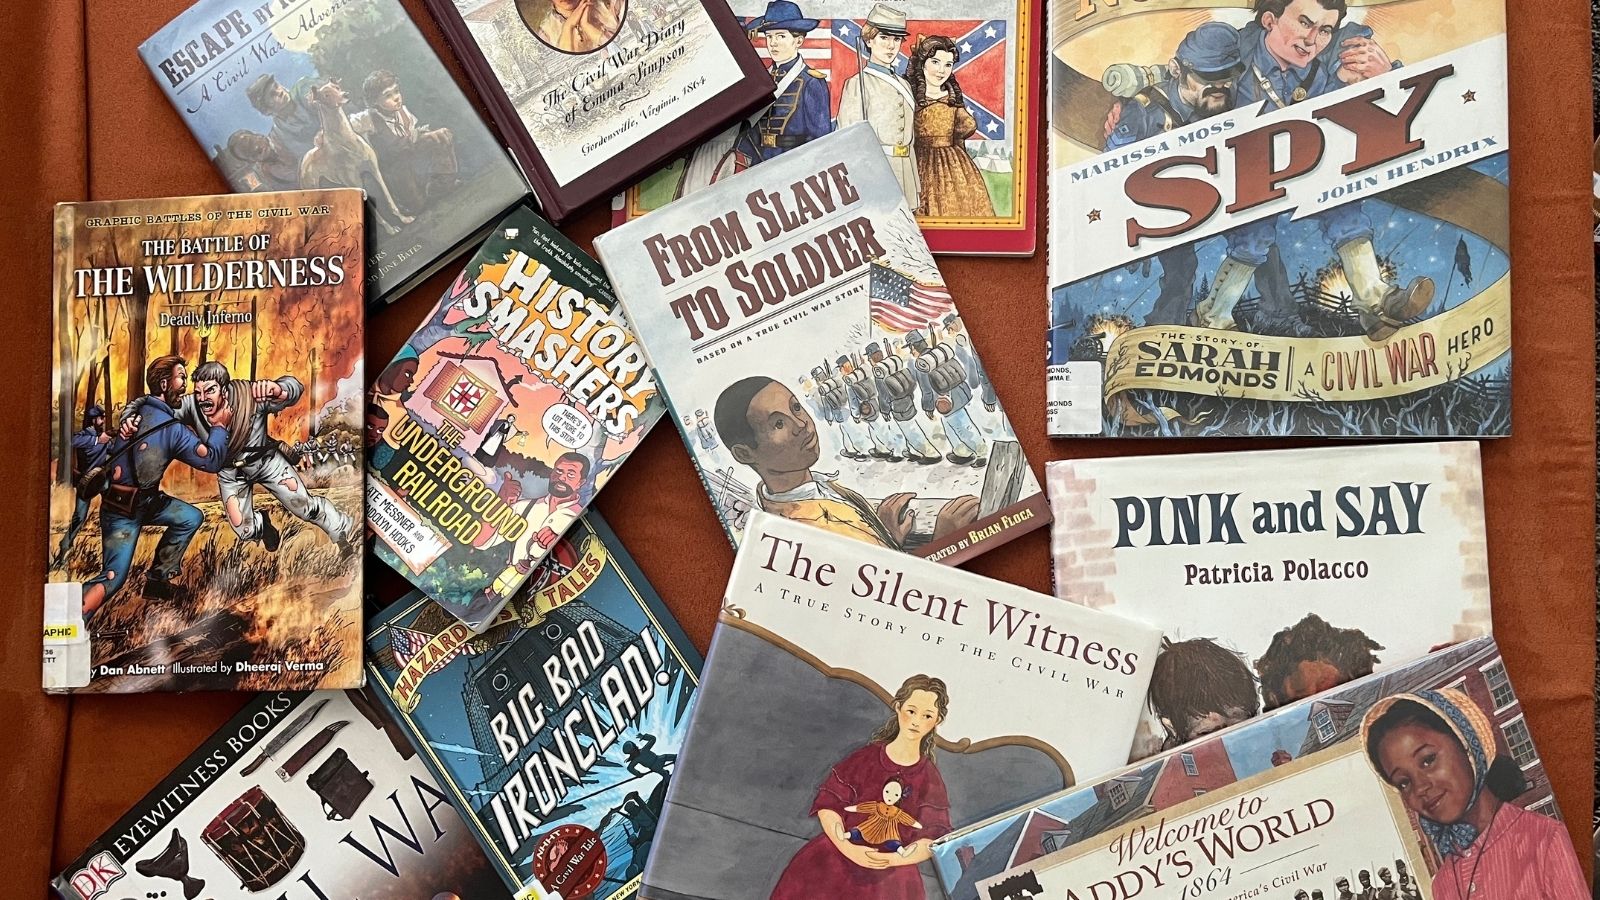 Civil War Books For Kids scattered around on a table